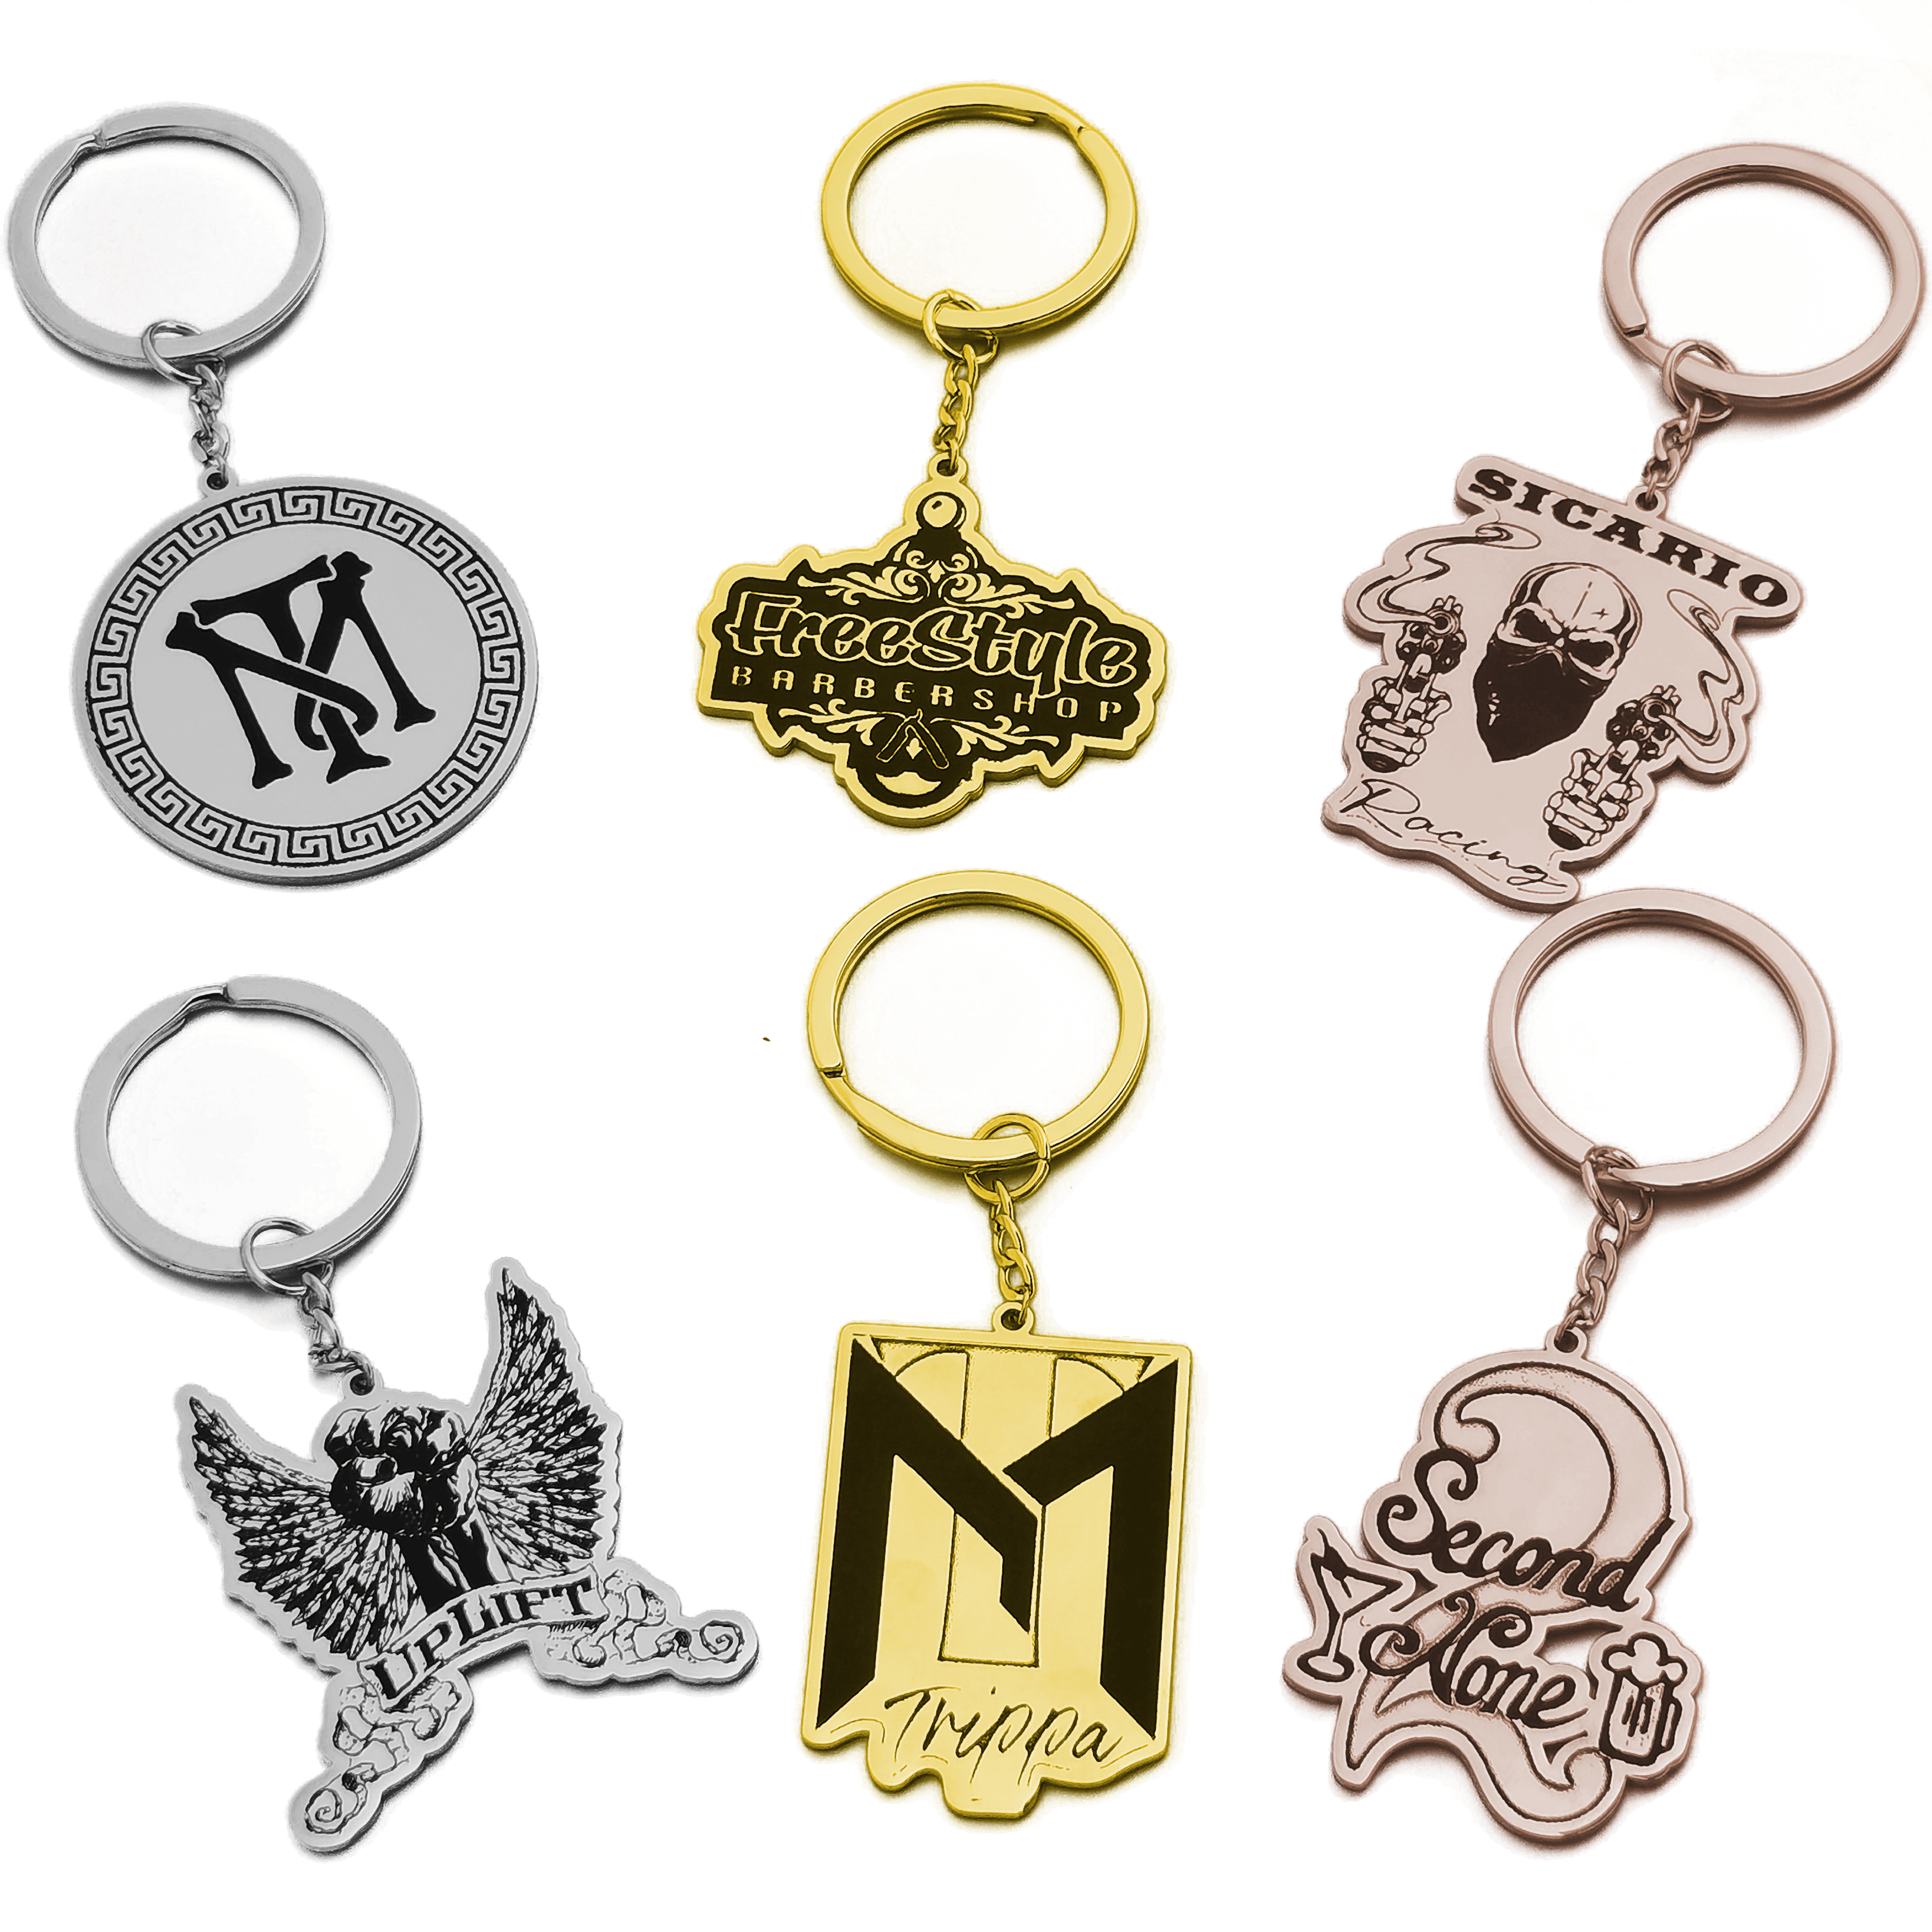 Gold Engravable Keychain> Gold Key Chain, Key Chain>Monogram, Initial,  Personalize> Unisex Design>2 to Choose From>Sturdy Key Chain>Key Ring